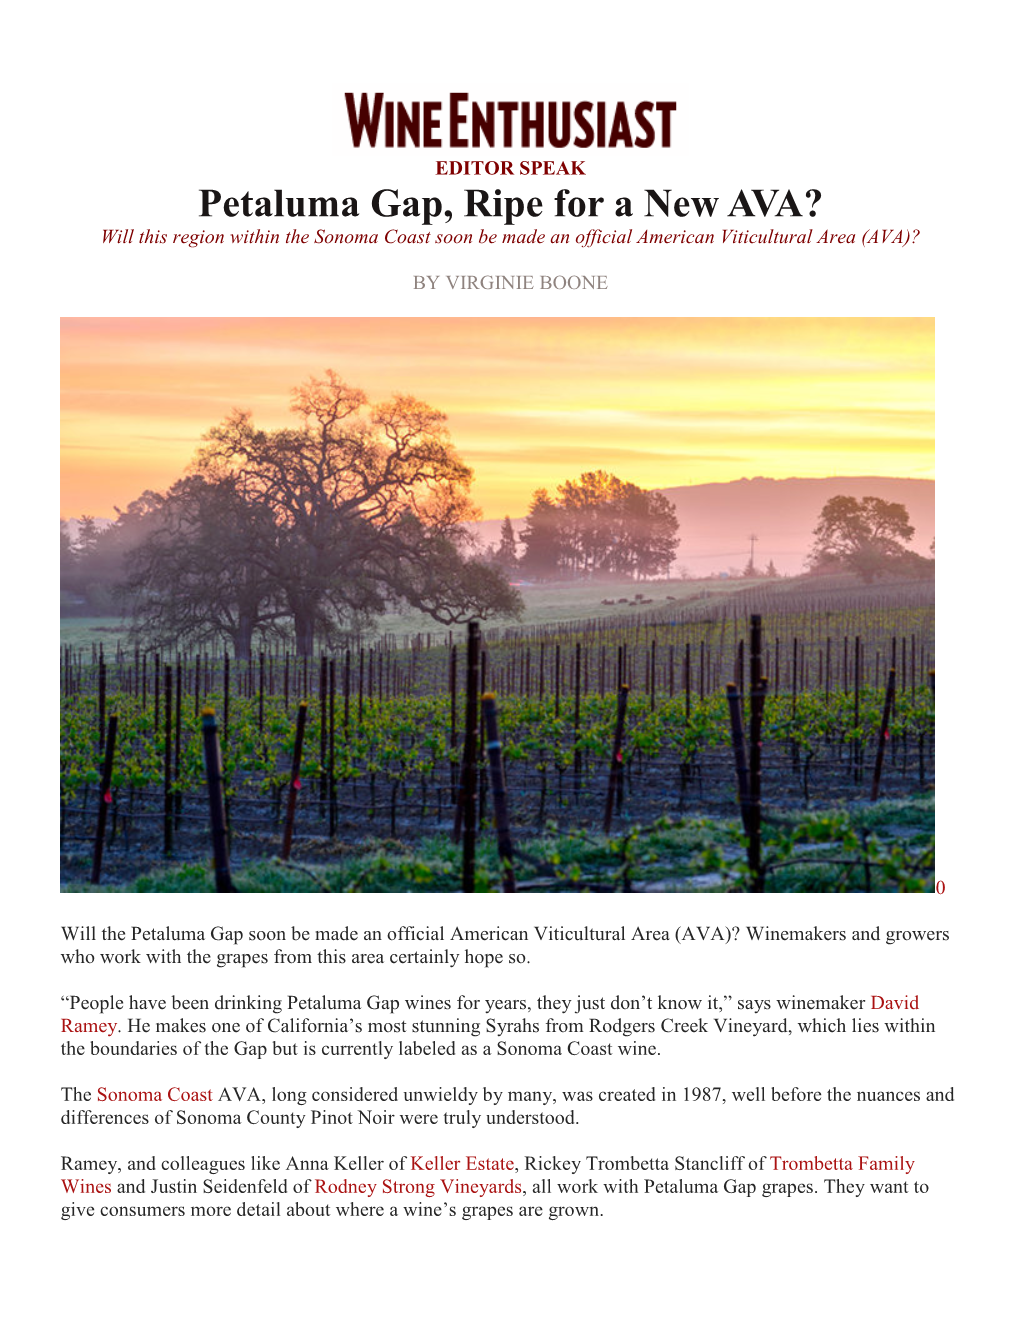 Petaluma Gap, Ripe for a New AVA? Will This Region Within the Sonoma Coast Soon Be Made an Official American Viticultural Area (AVA)?